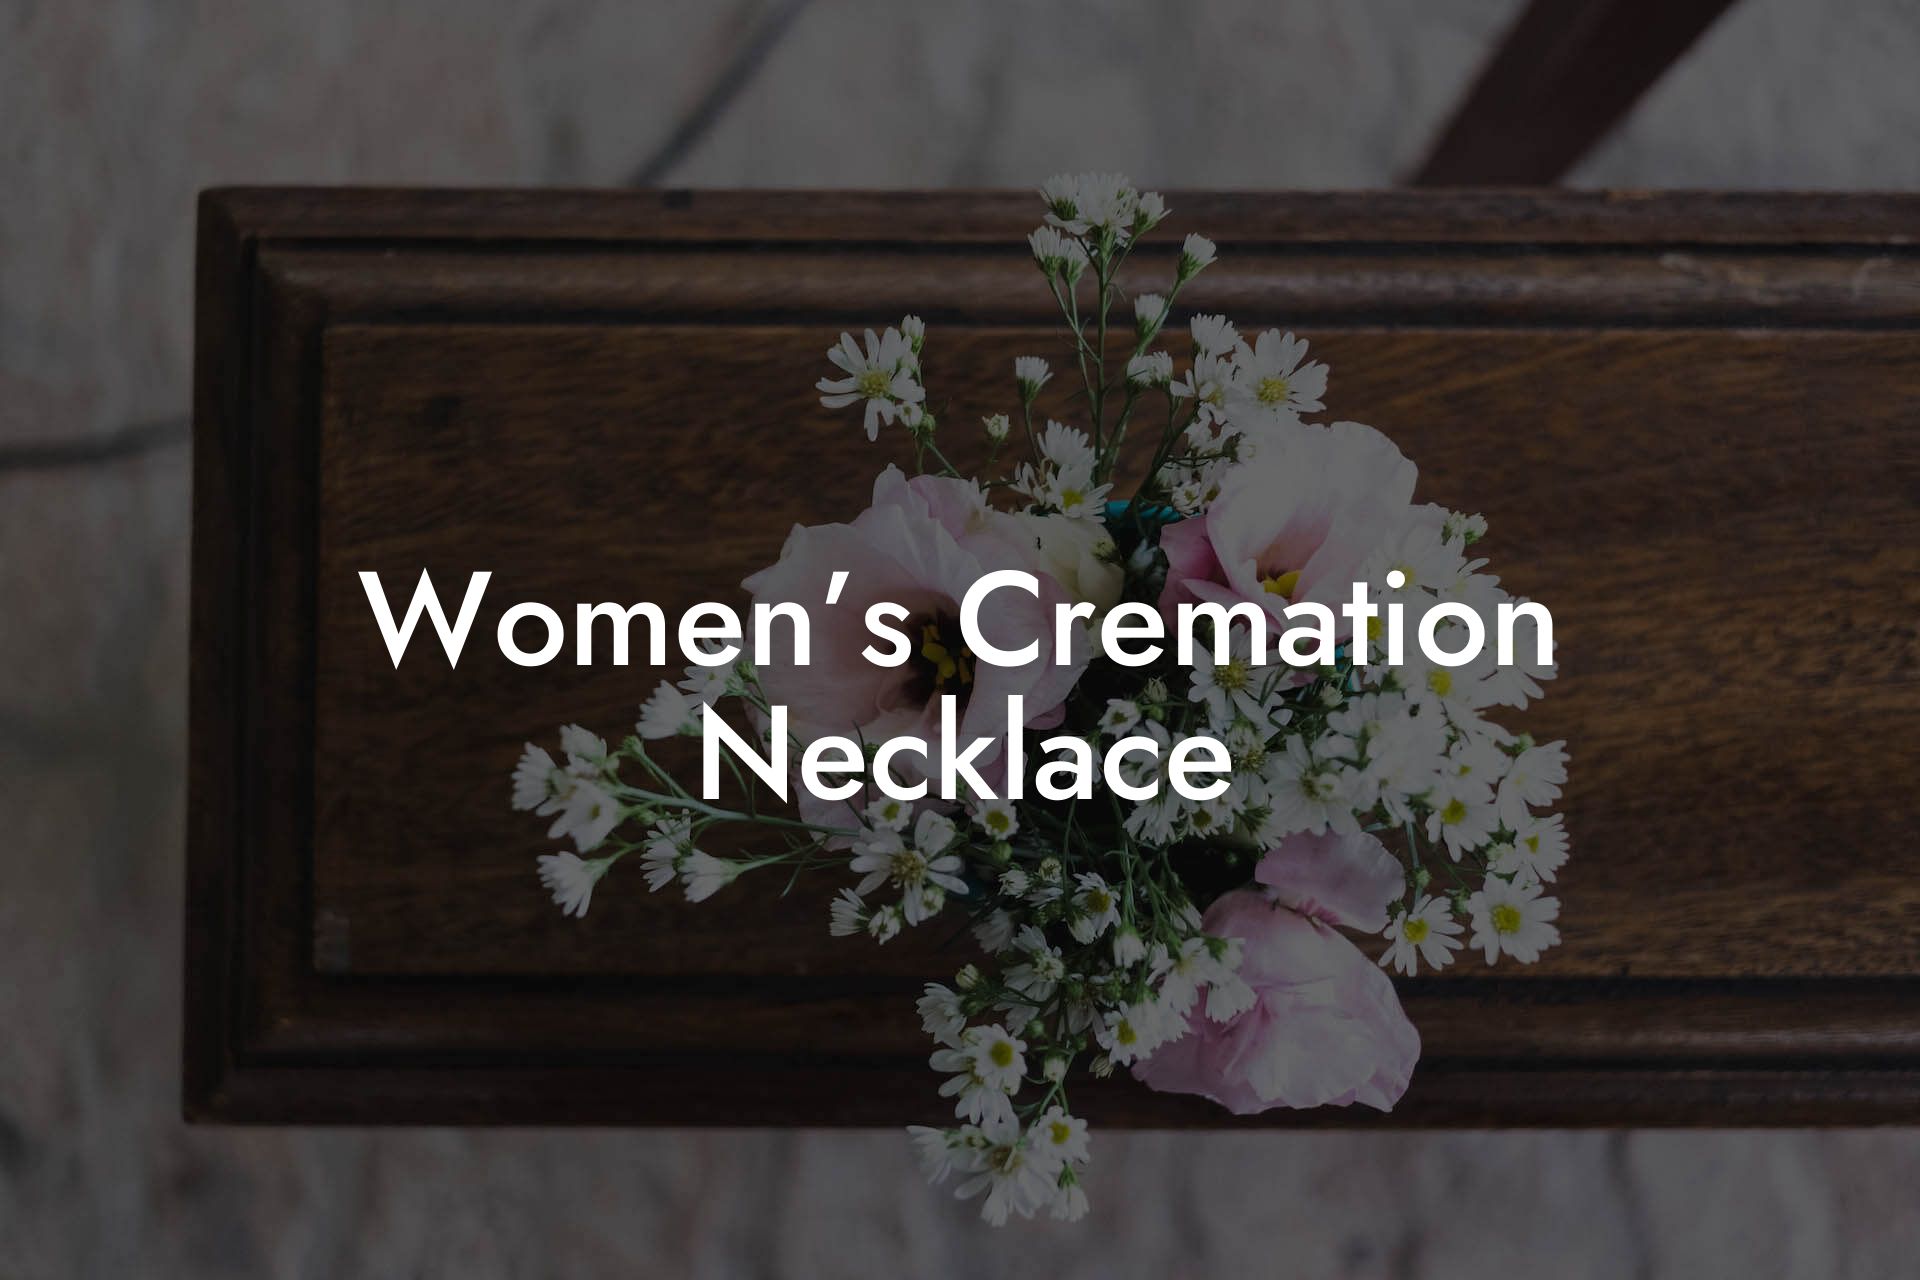 Women’s Cremation Necklace